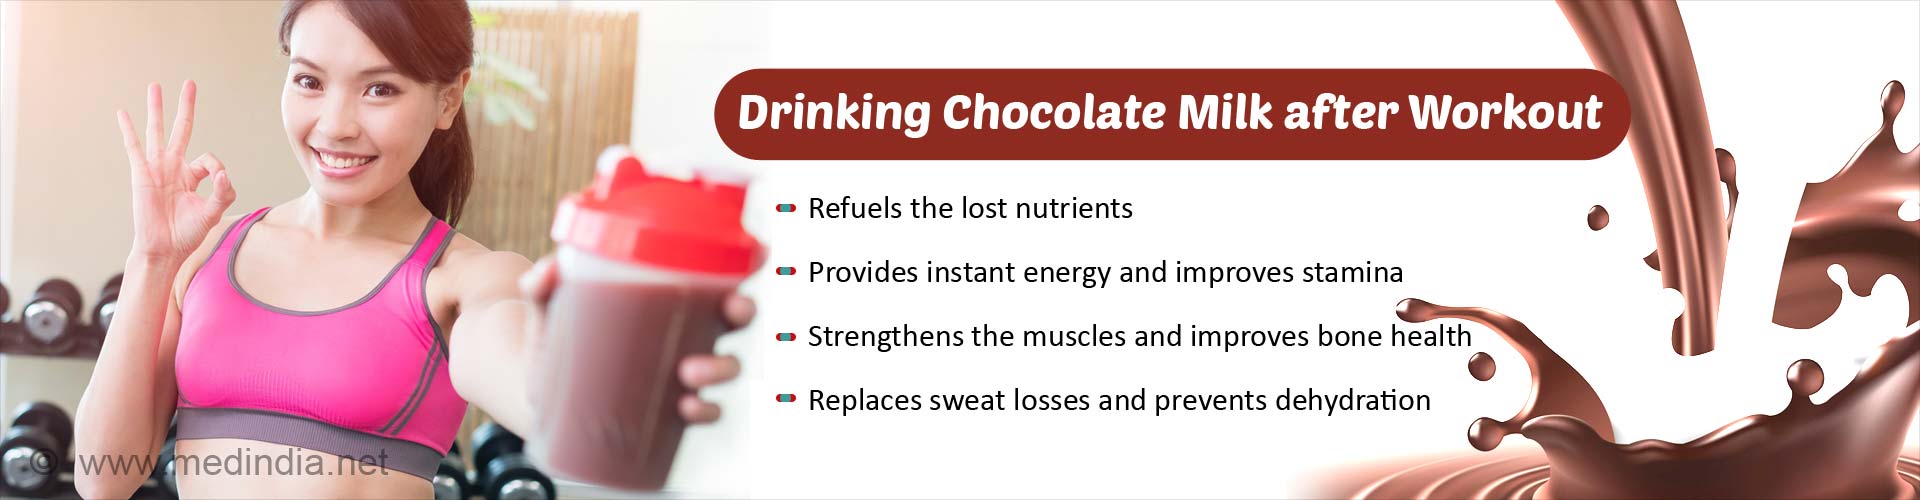 Drinking chocolate milk after workout. Refuels the lost nutrients. Provides instant energy and improves stamina. Strengthens the muscles and improves bone health. Replaces sweat losses and prevents dehydration.